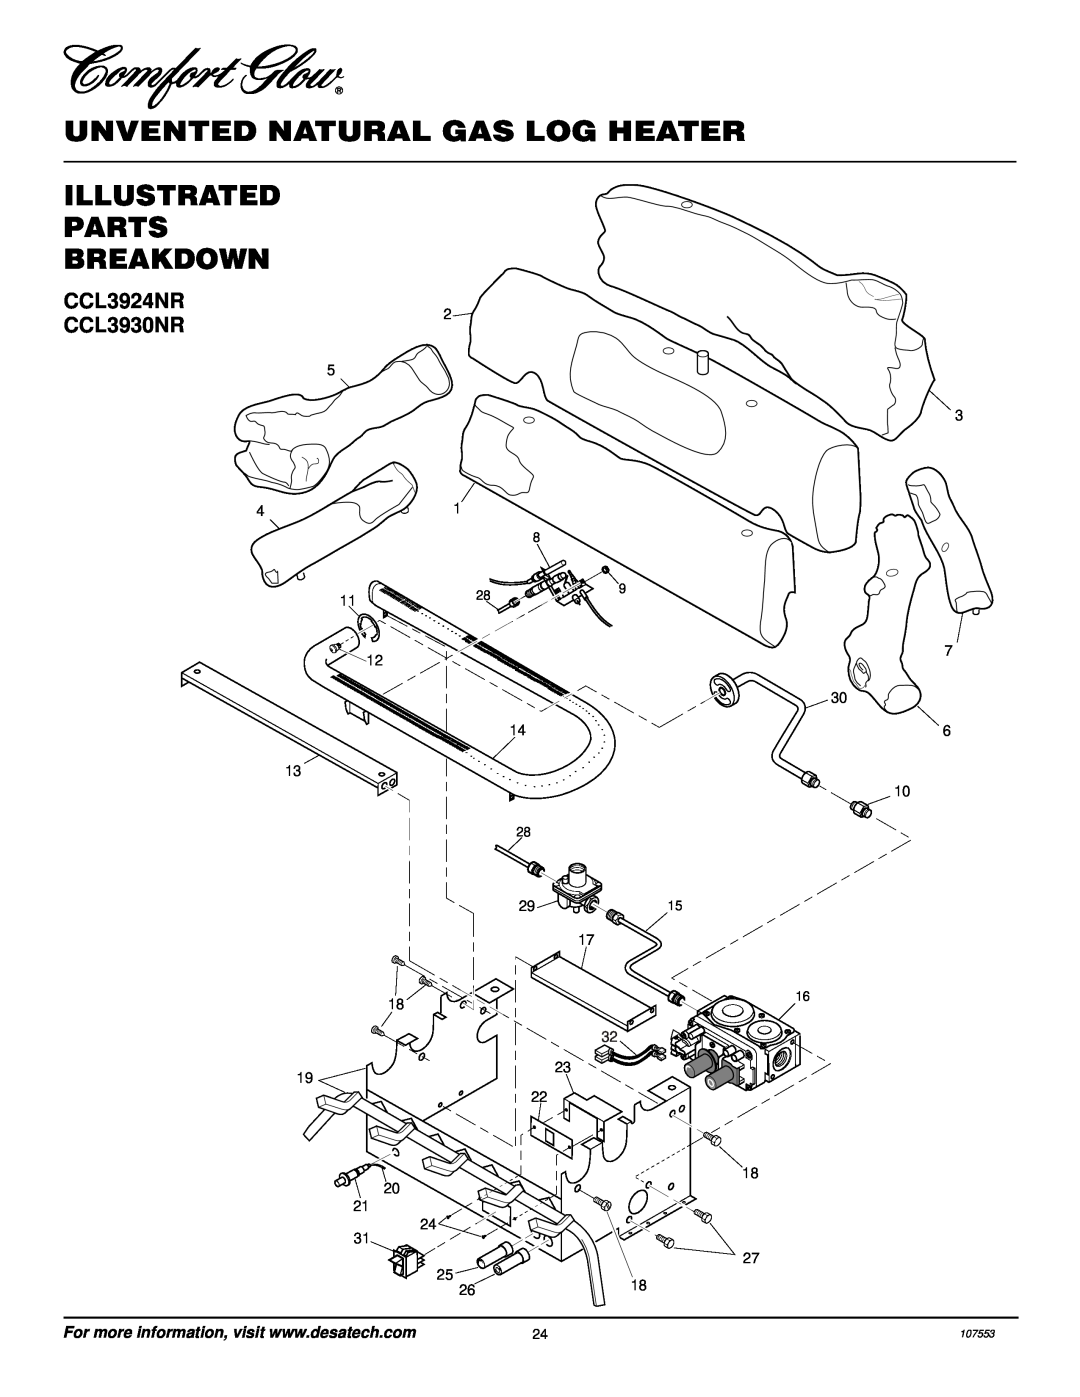 Desa installation manual CCL3924NR CCL3930NR, Unvented Natural Gas Log Heater, Illustrated Parts Breakdown, To P 